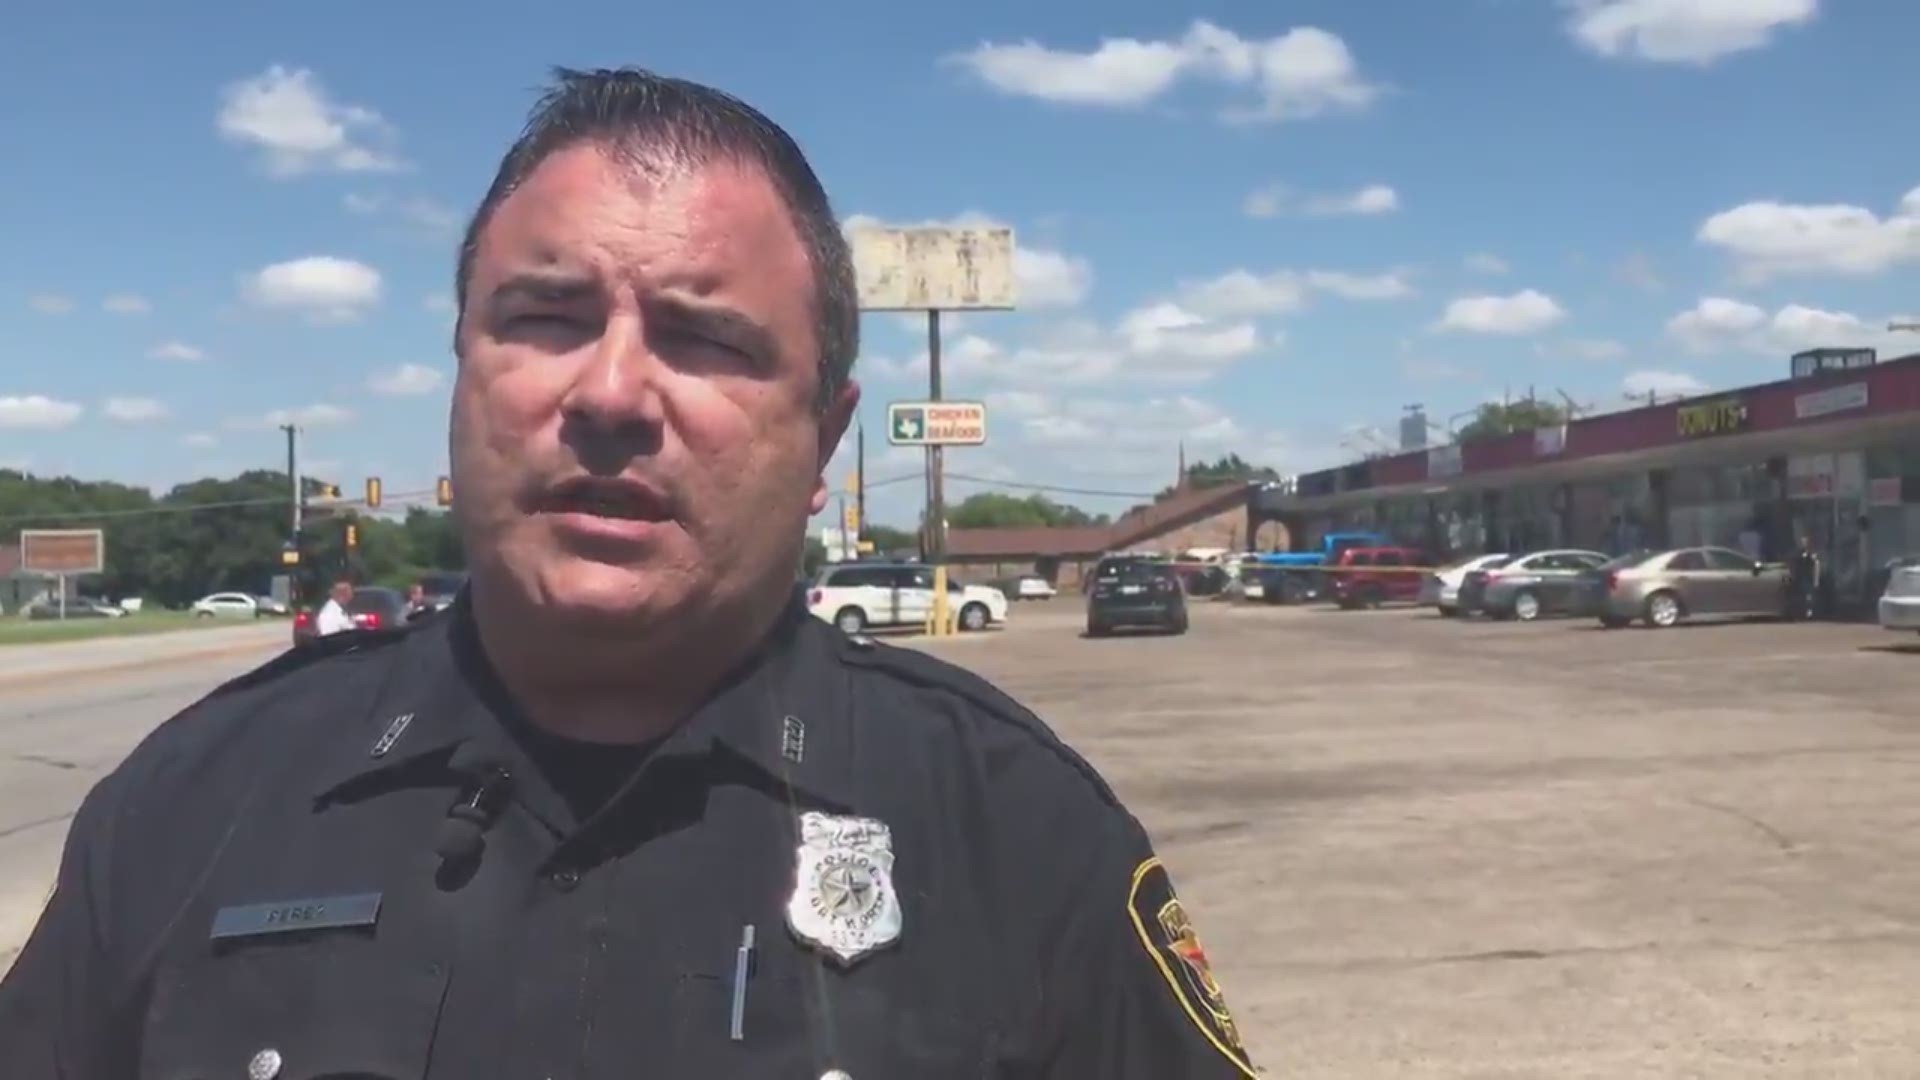 Police give an update from the scene of a Fort Worth drive-by shooting that left three injured Wednesday afternoon.